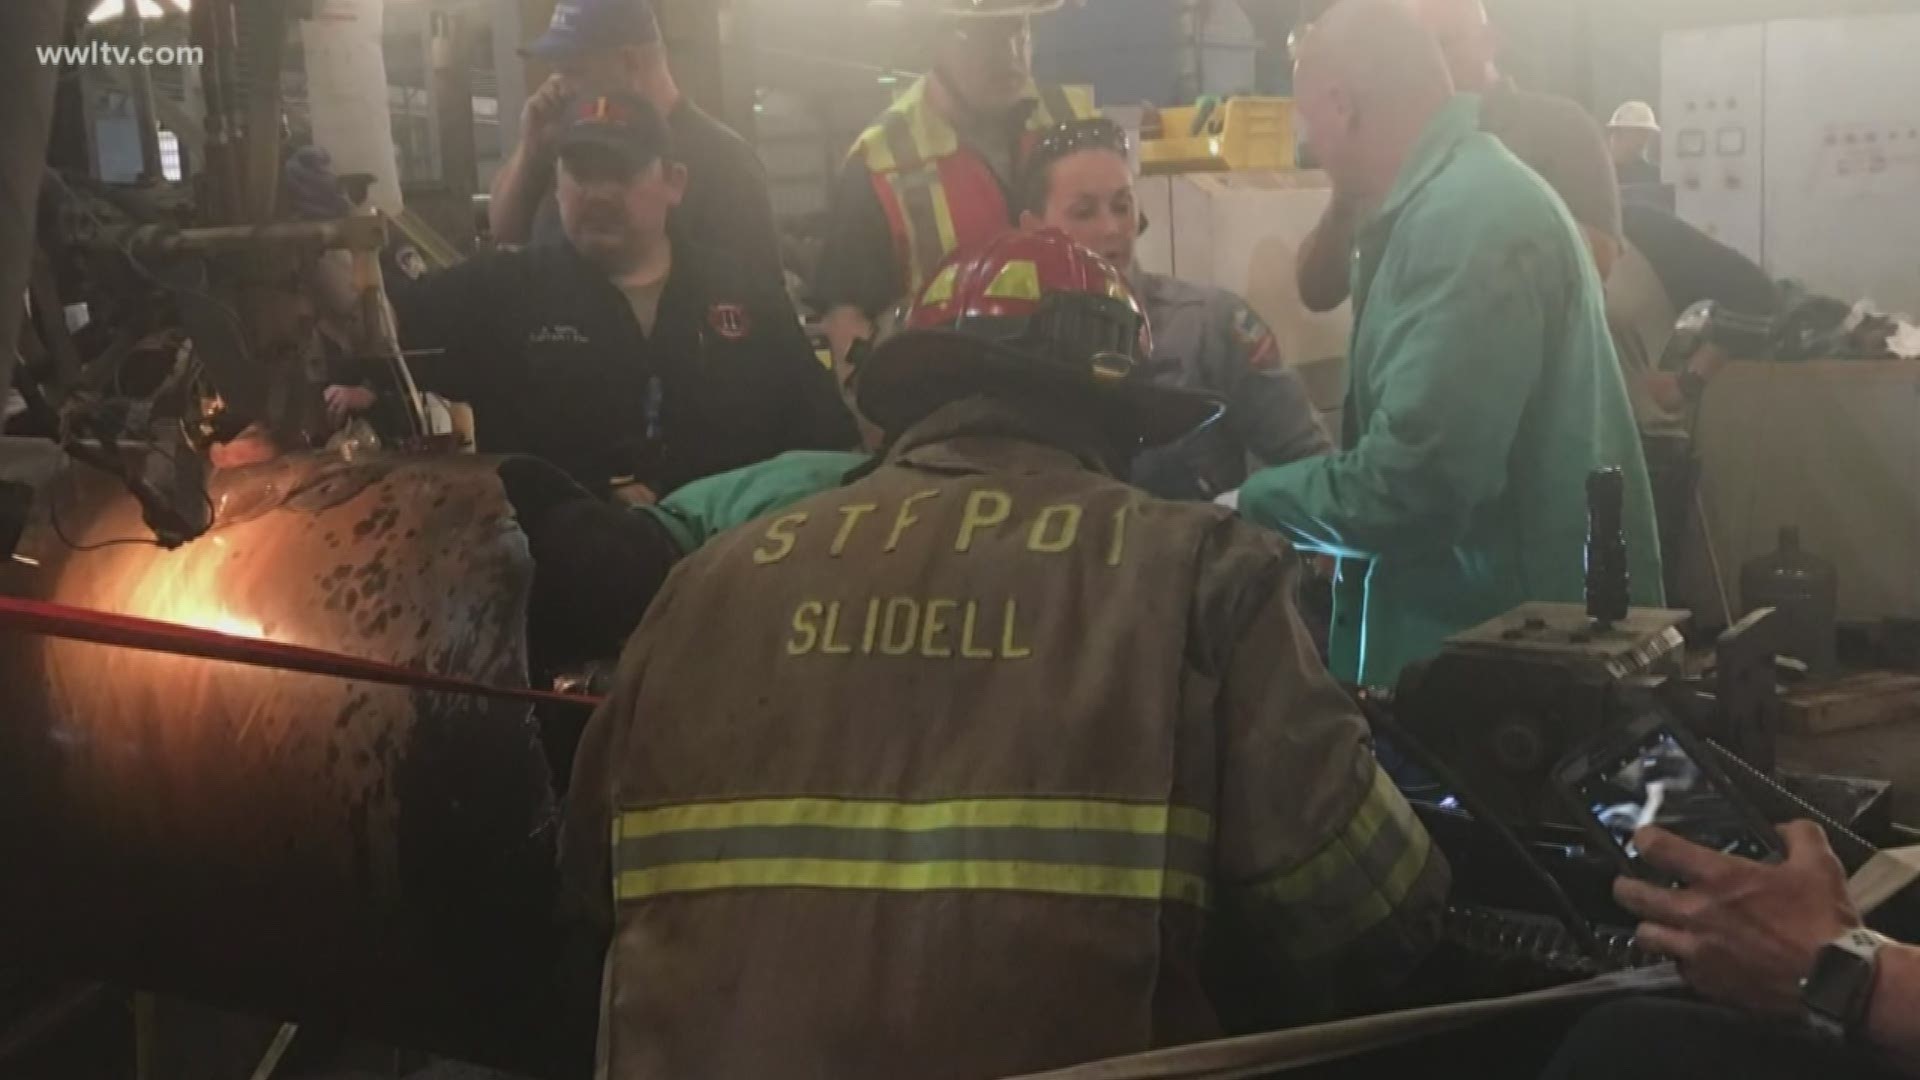 A post from the fire district’s Facebook page showed several photos of department personnel working to free the worker and a later photo showing someone on a stretcher being taken to a helicopter.